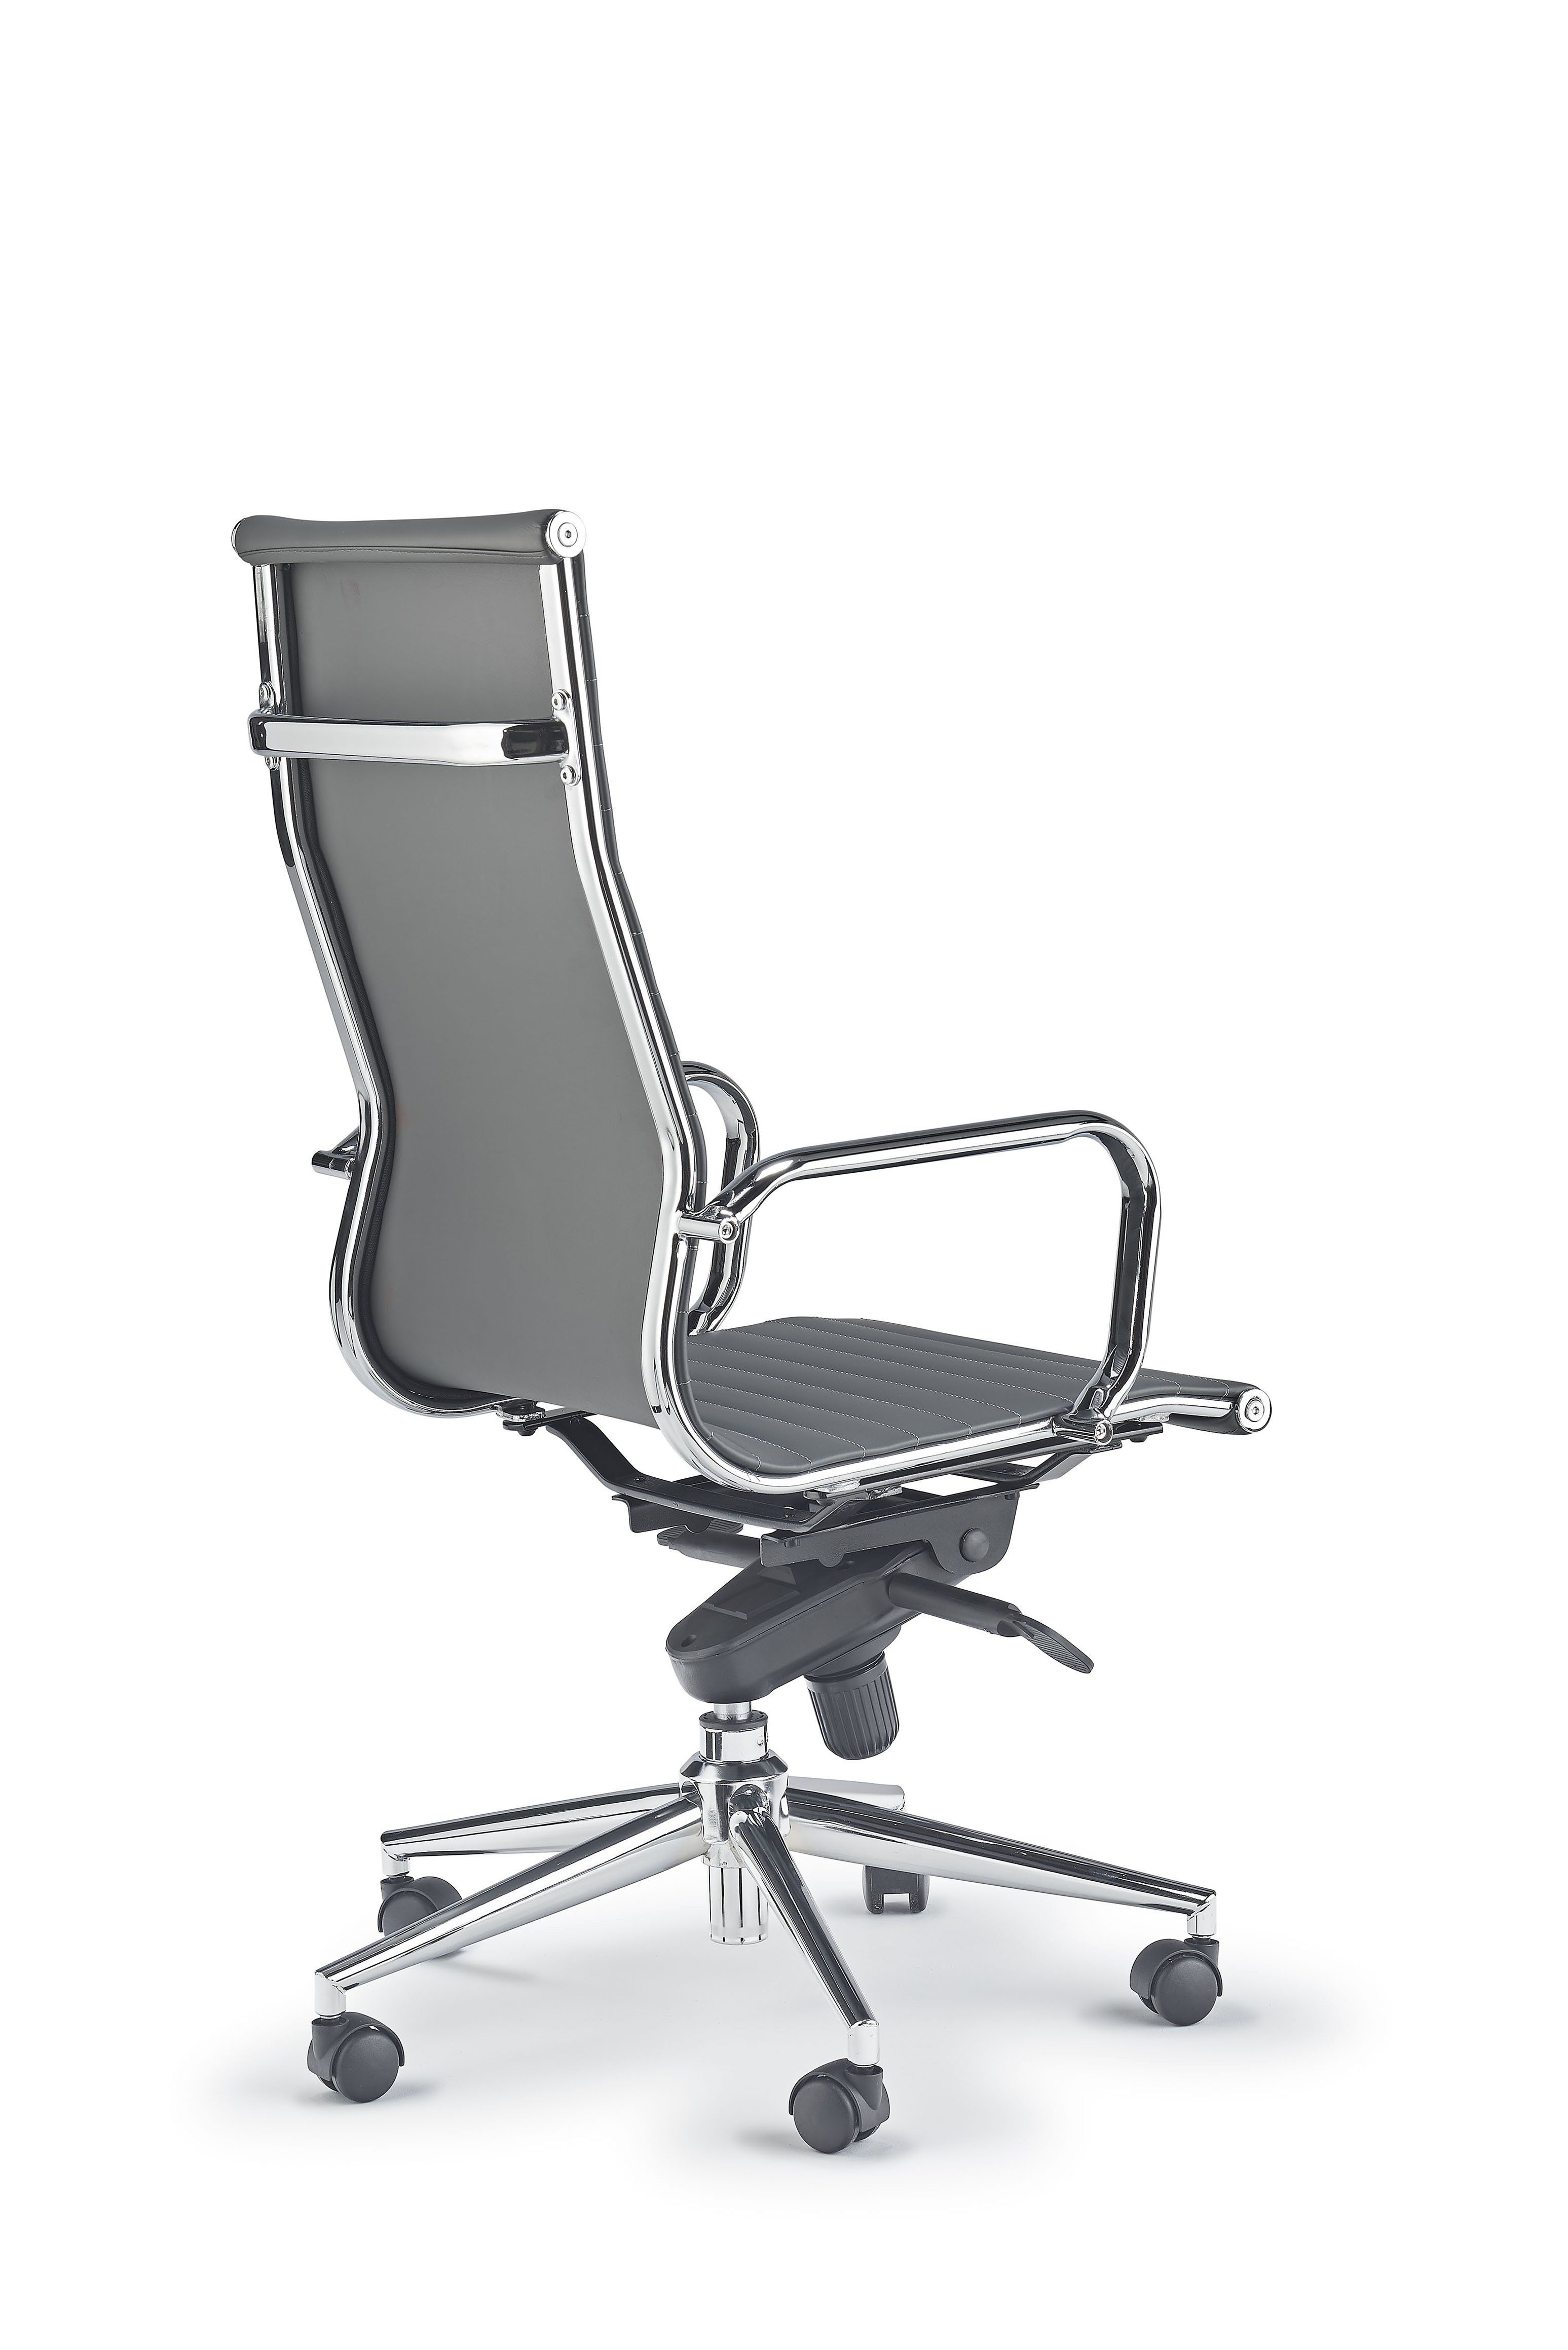 Designer Epsom Classic Style Ribbed  Office Executive Chair High Back White